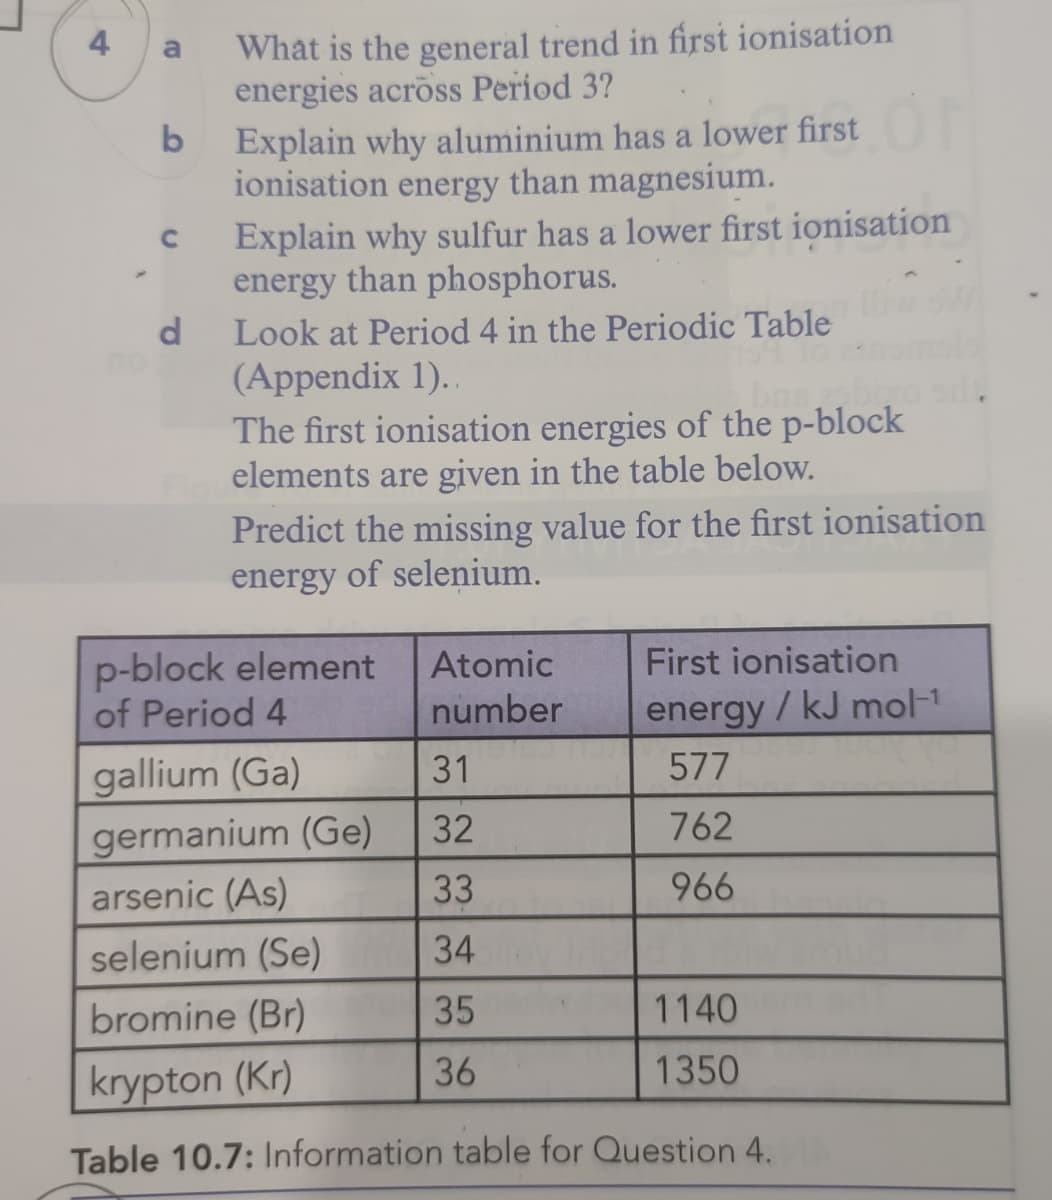 What is the general trend in first ionisation
energies across Period 3?
4
a
Explain why aluminium has a lower first
ionisation energy than magnesium.
Explain why sulfur has a lower first ionisation
energy than phosphorus.
Look at Period 4 in the Periodic Table
(Appendix 1)..
The first ionisation energies of the p-block
elements are given in the table below.
Predict the missing value for the first ionisation
energy of selenium.
d
bas
p-block element
of Period 4
Atomic
First ionisation
number
energy/ kJ mol-1
gallium (Ga)
31
577
germanium (Ge)
32
762
arsenic (As)
33
966
selenium (Se)
34
bromine (Br)
35
1140
36
1350
krypton (Kr)
Table 10.7: Information table for Question 4.
